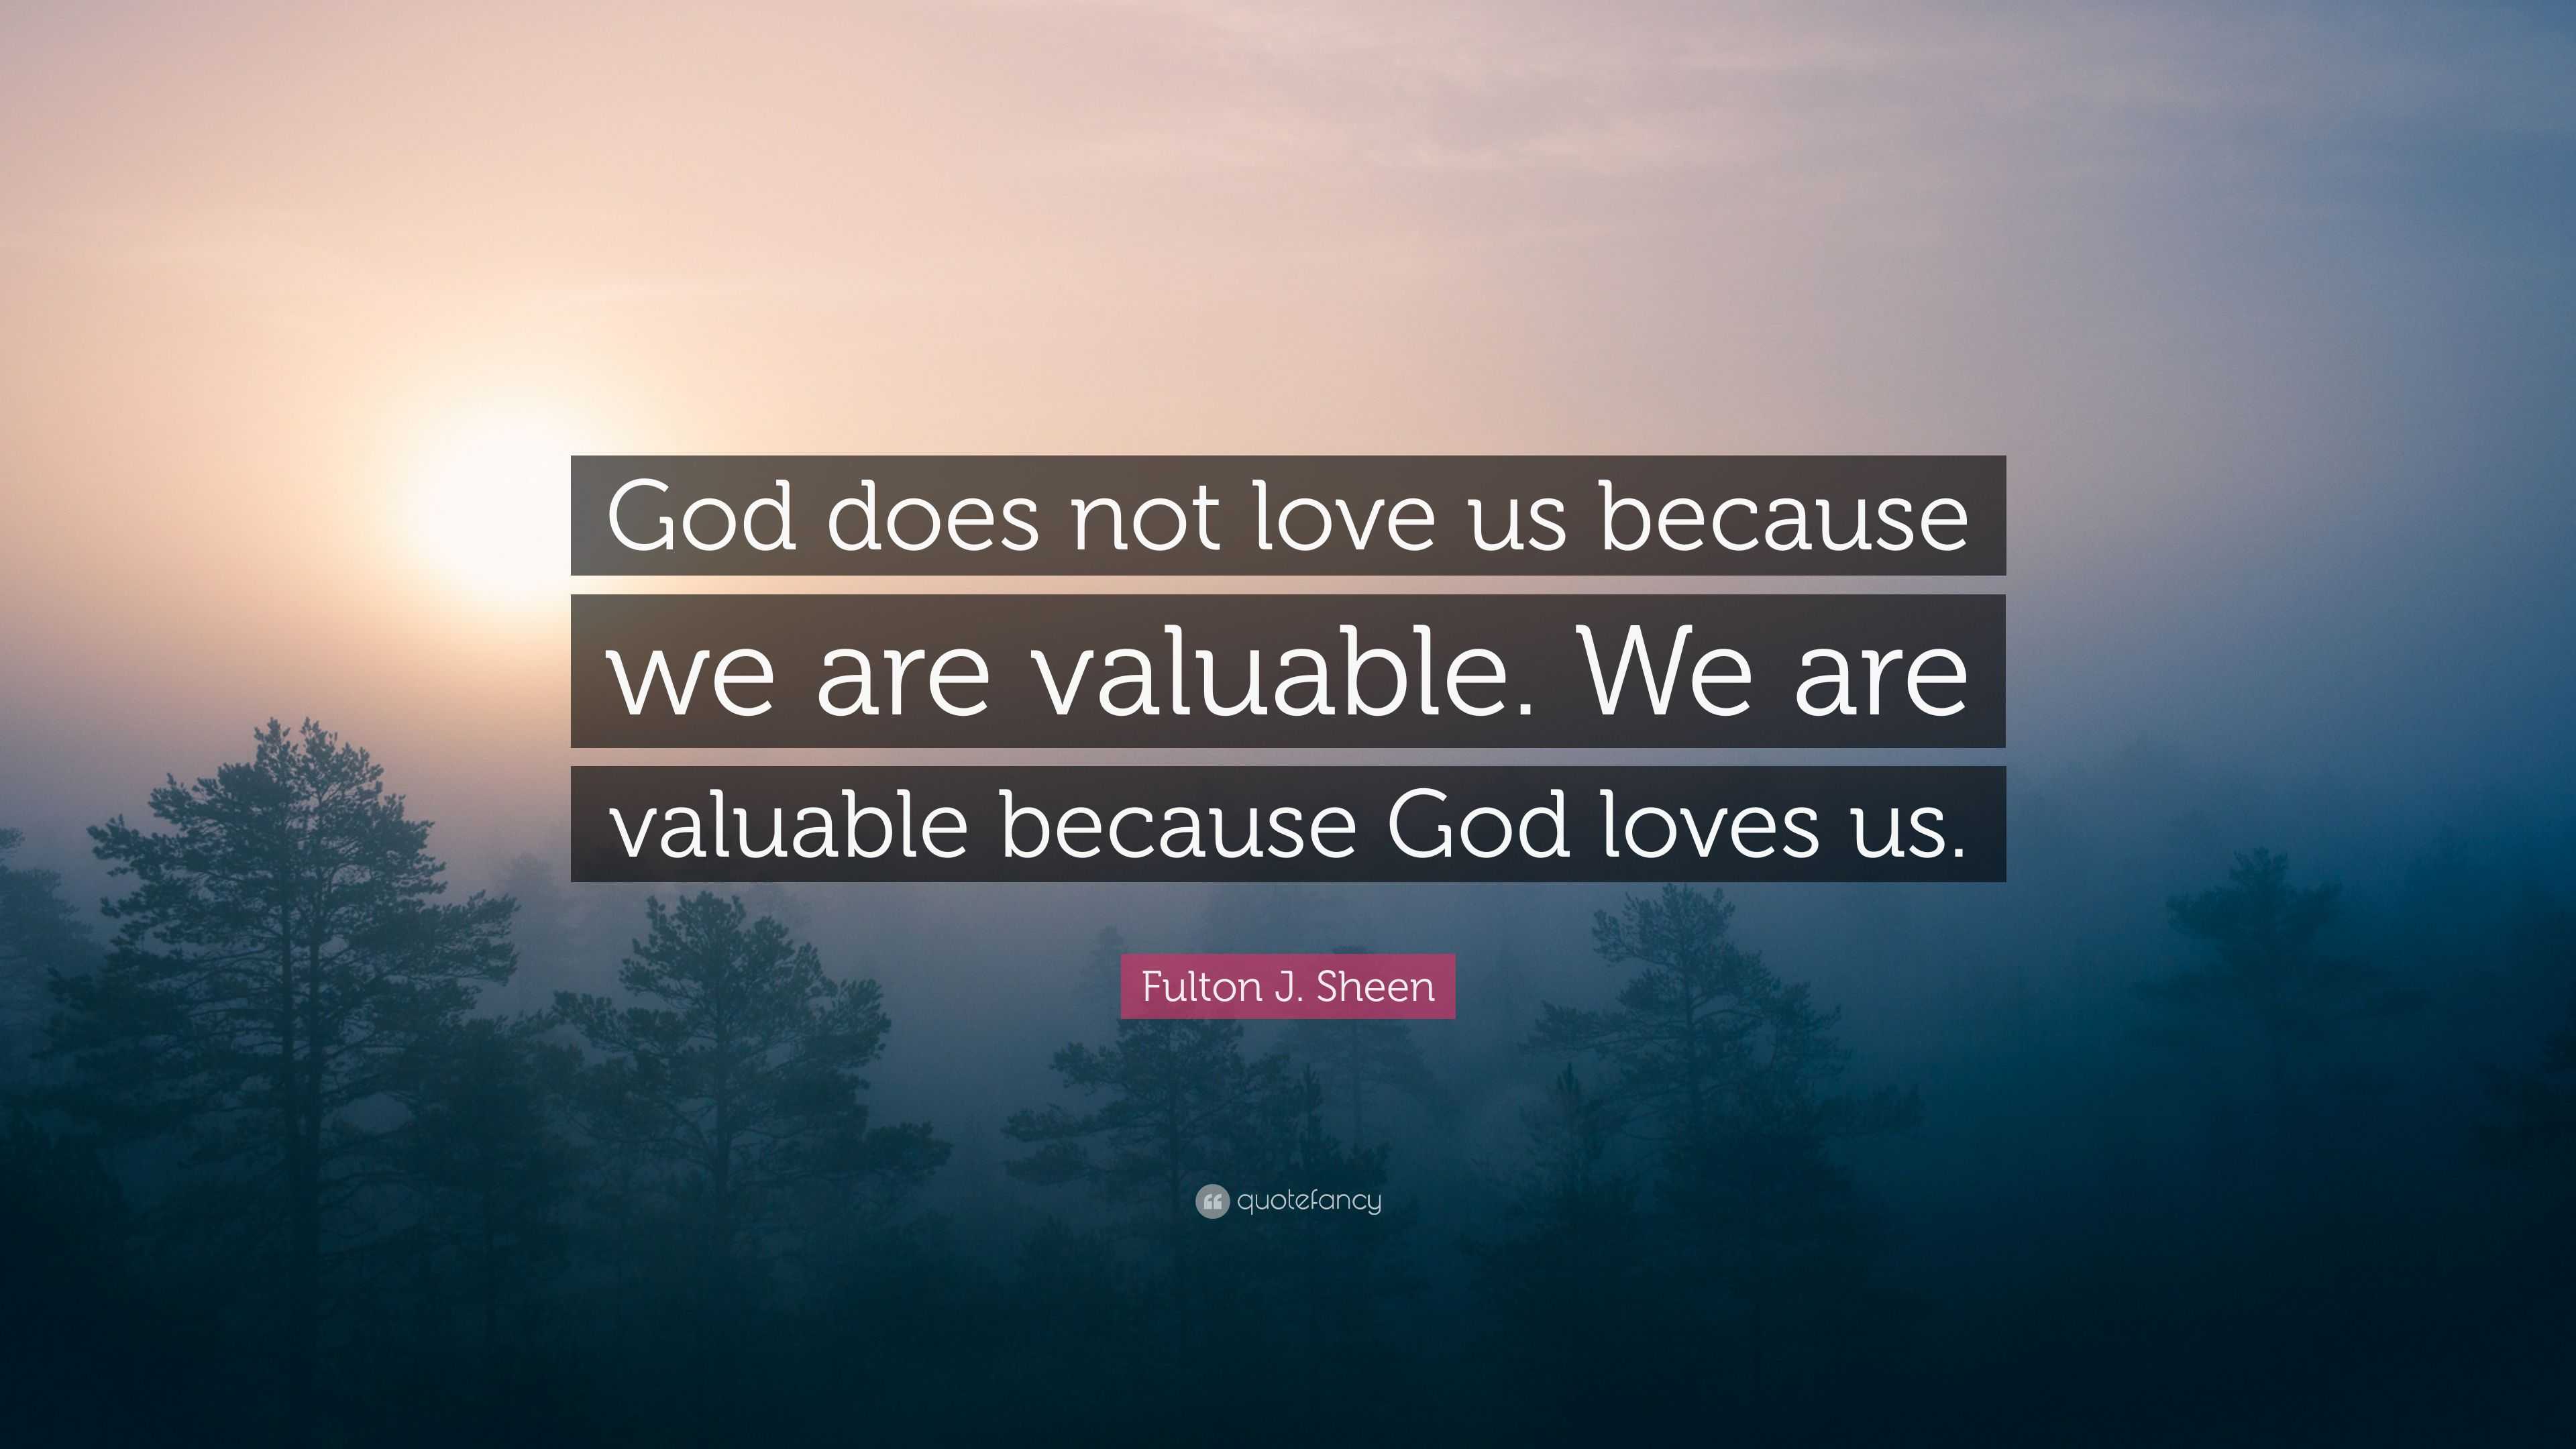 Fulton J. Sheen Quote: “God does not love us because we are valuable